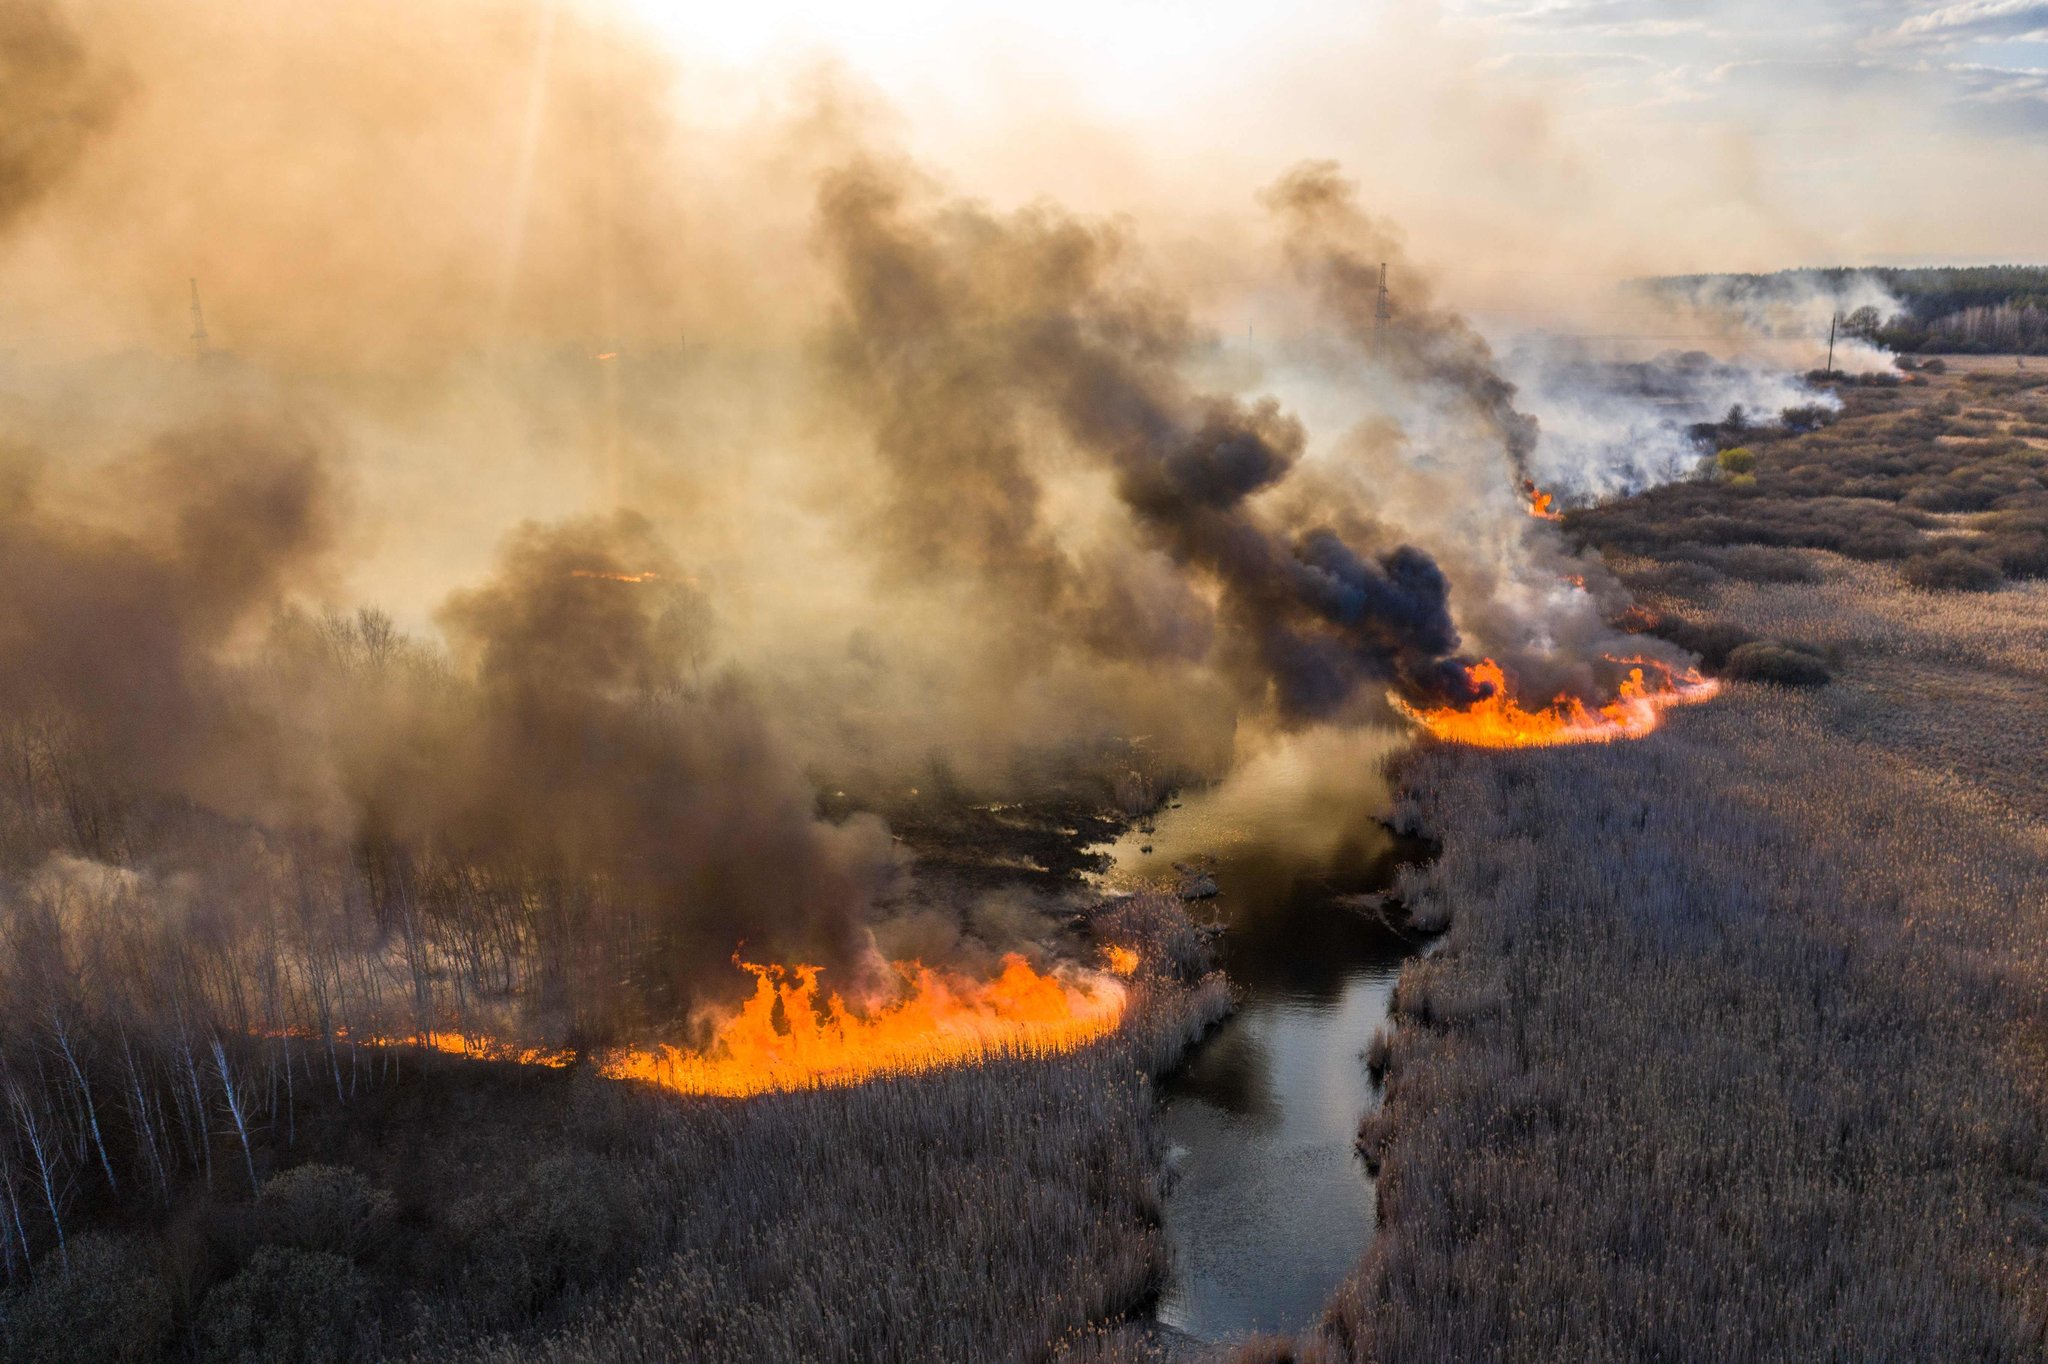 Aerial view of a field fire burning on 10 April 2020 in the Chernobyl Exclusion Zone in Ukraine. Photo: Volodymyr Shuvayev / Agence France-Presse / Getty Images